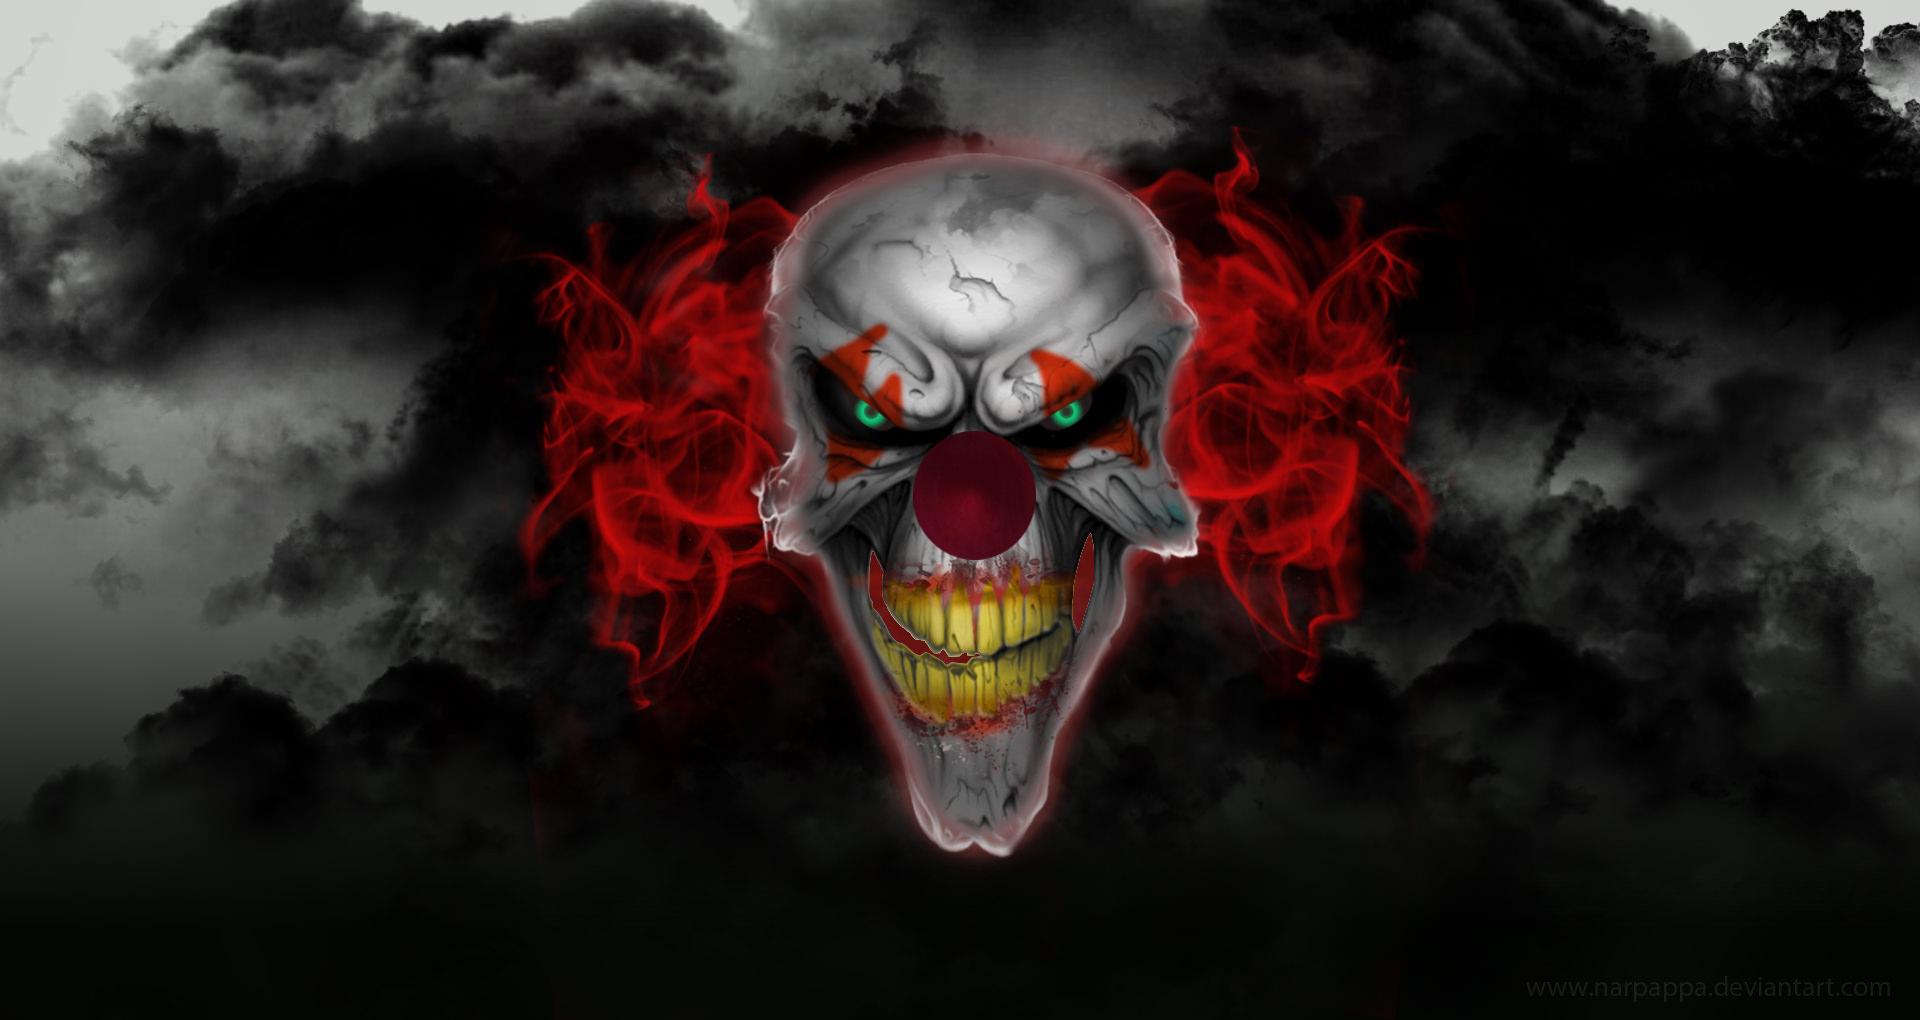 Download Pennywise The Dancing Clown Wallpaper | Wallpapers.com